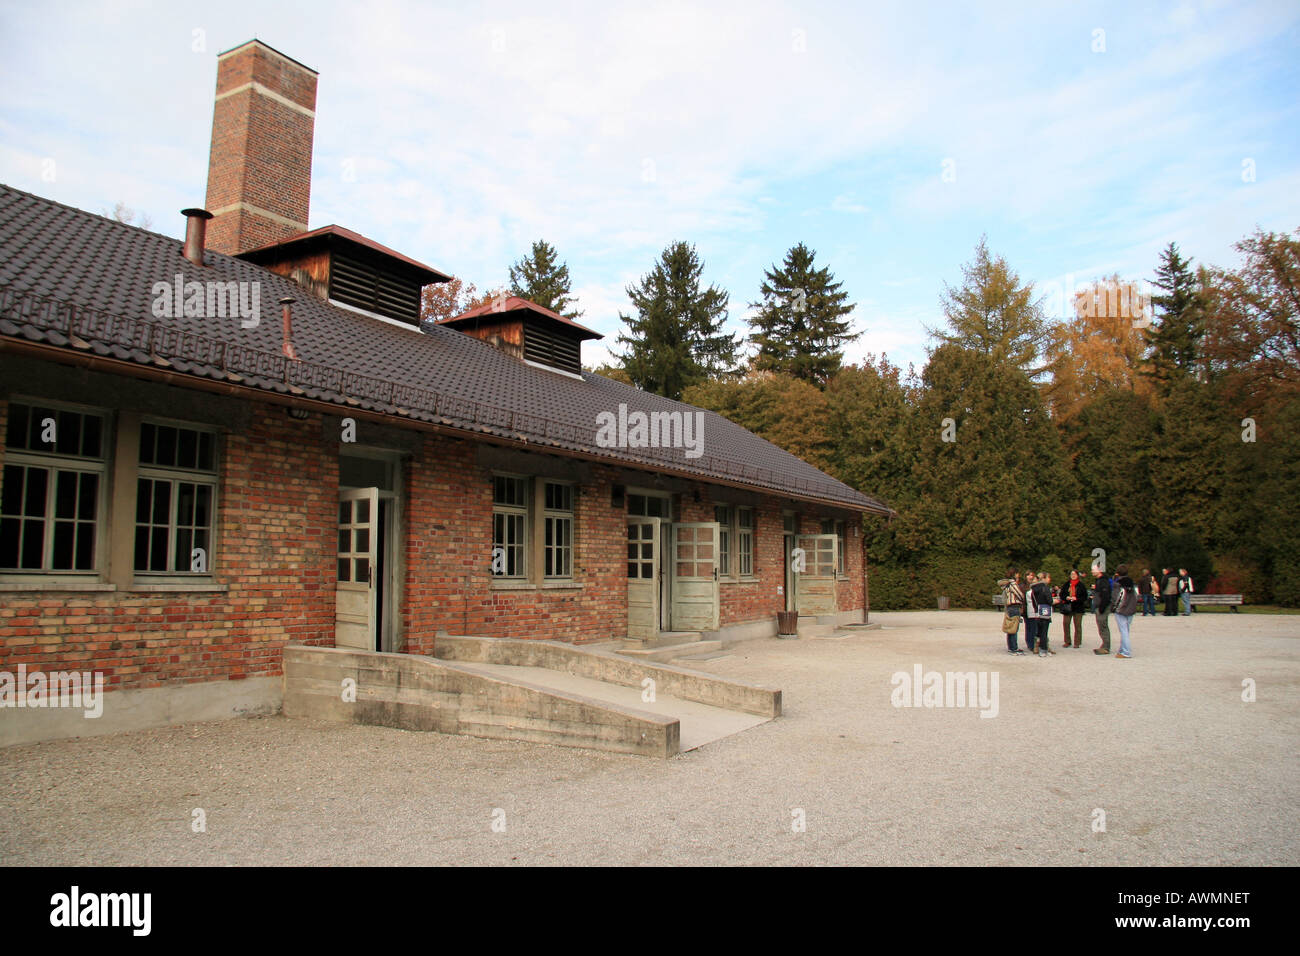 The second Crematoria building, Barrack X,  in the former German concentration camp at Dachau, Munich, Germany. Stock Photo